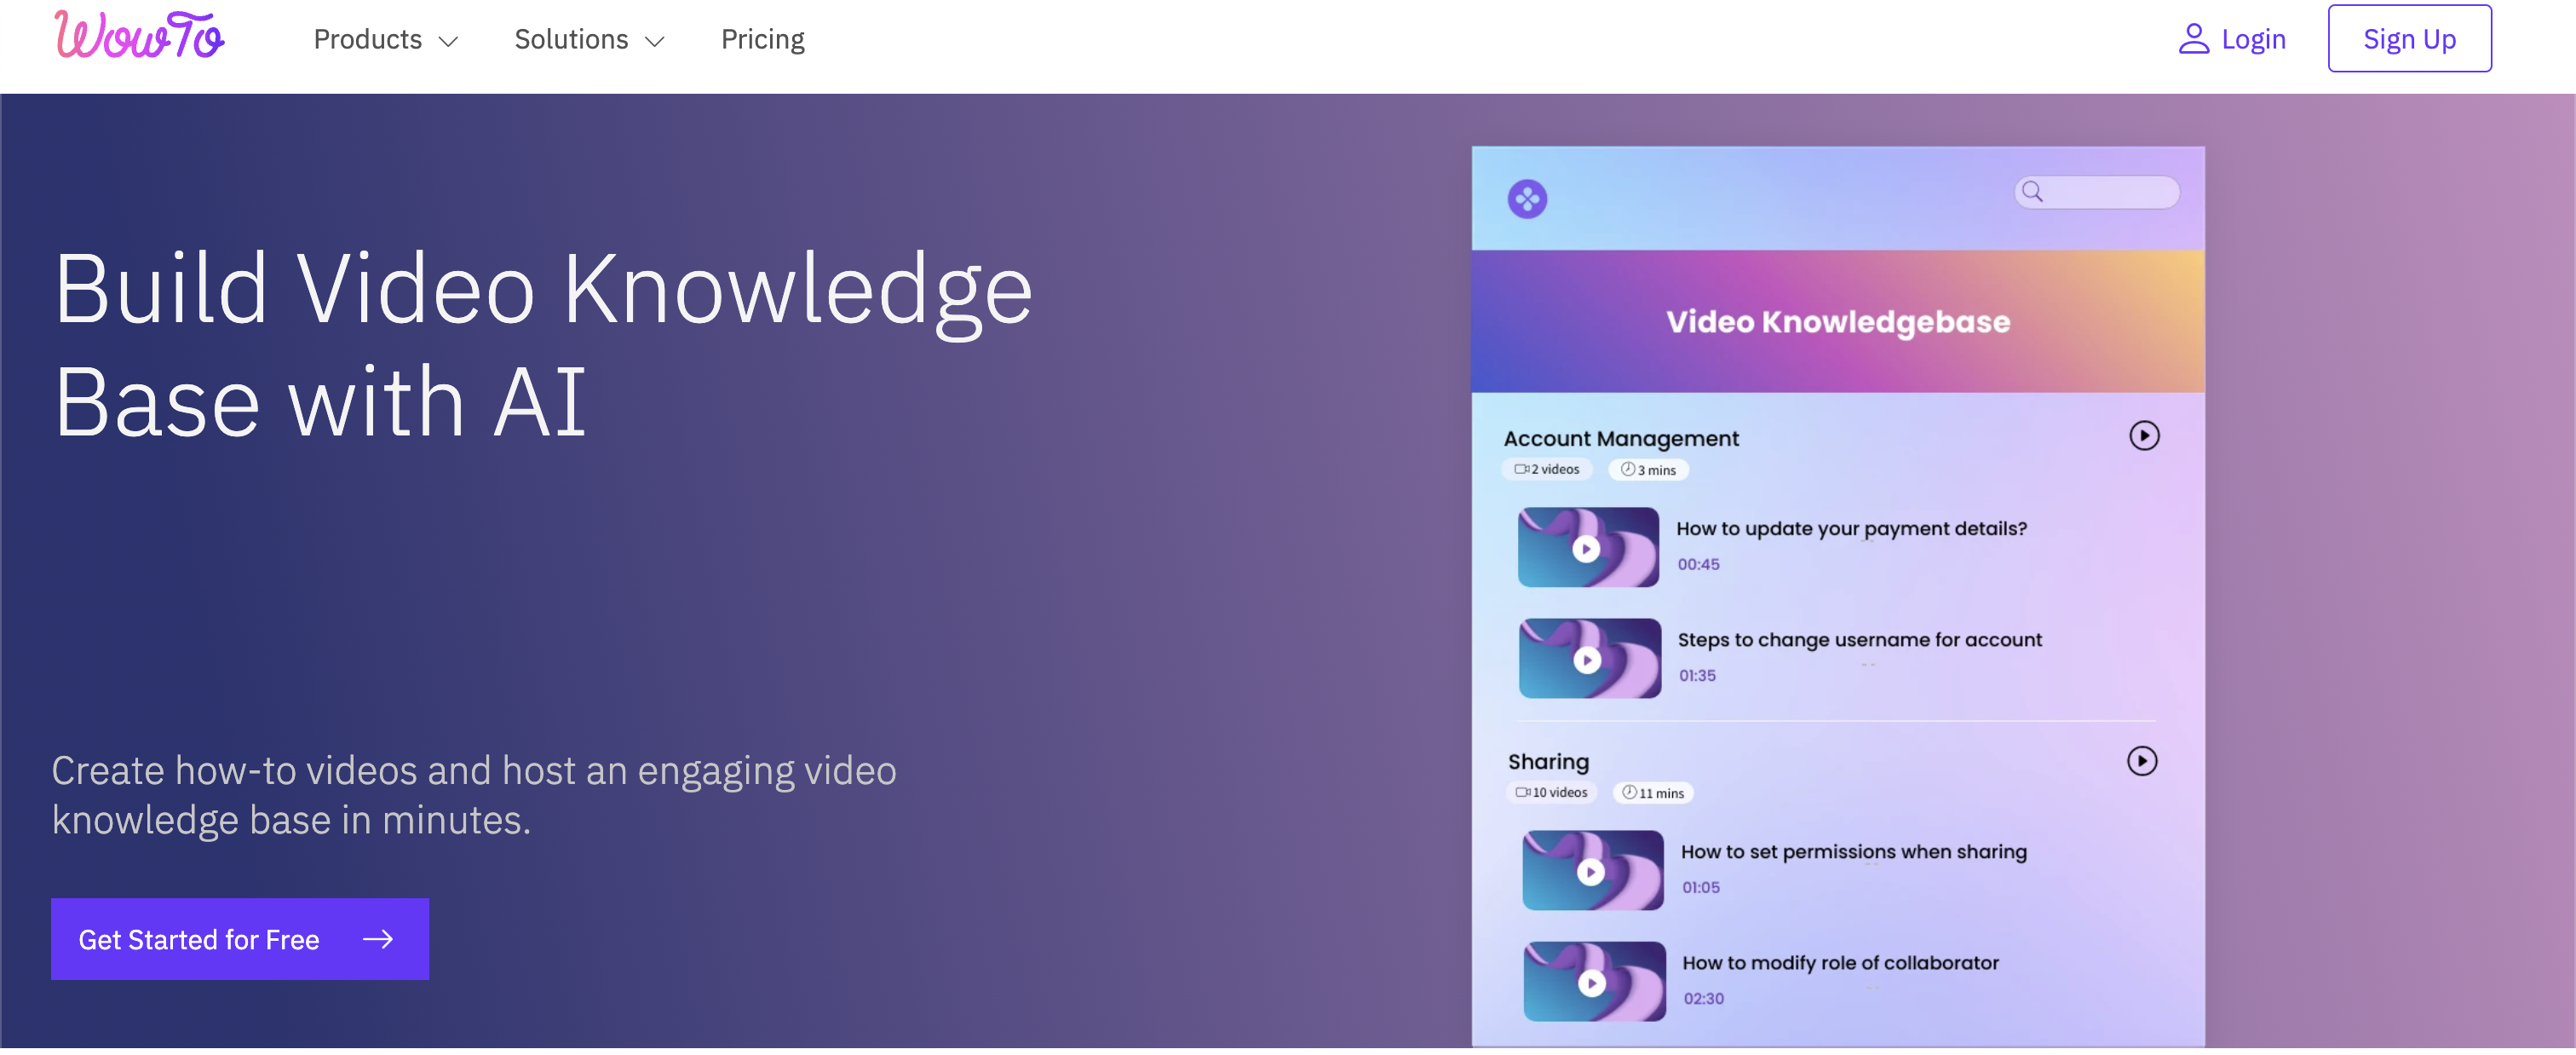 Become a Video Creation Pro with WowTo.ai: The Revolutionary Platform for Instructional Videos and Knowledge Bases.